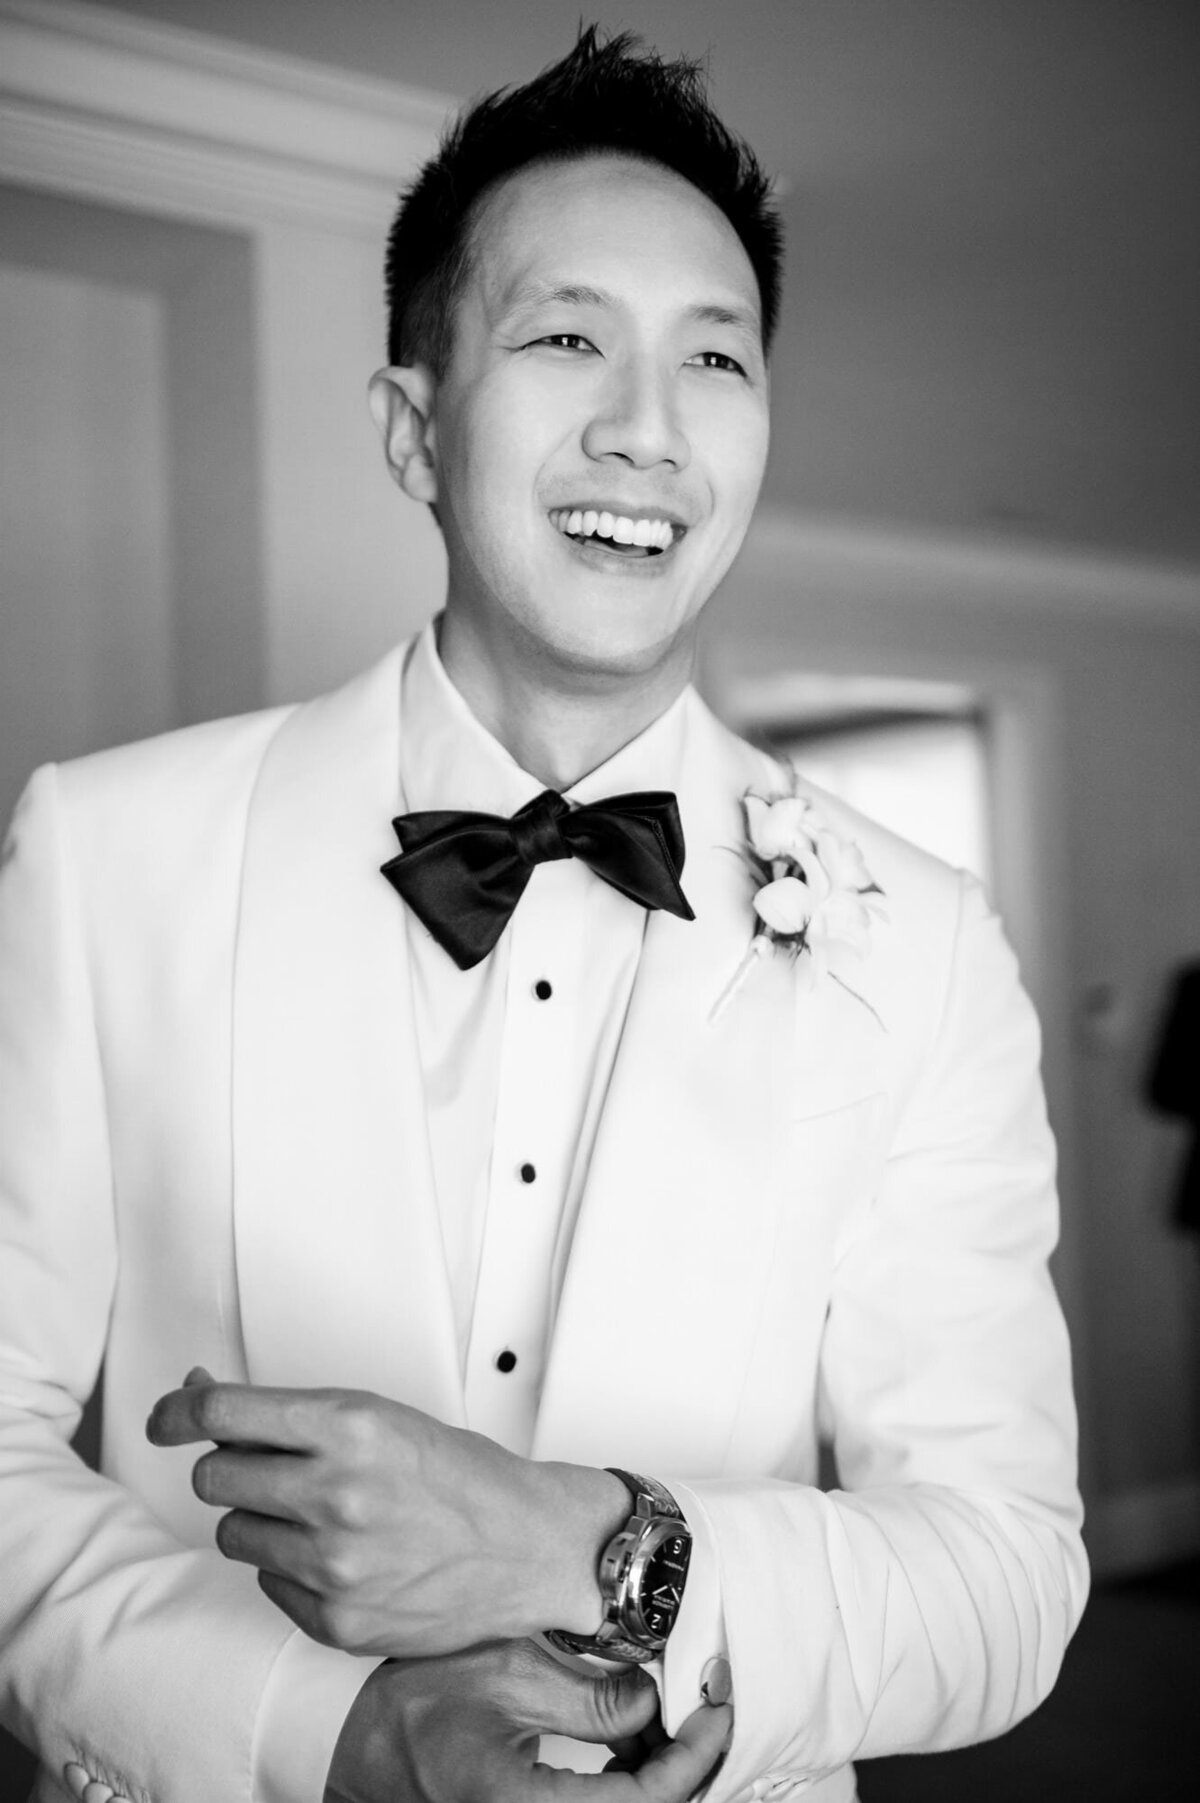 Groom smiling and laughing while he fixes his cuff links